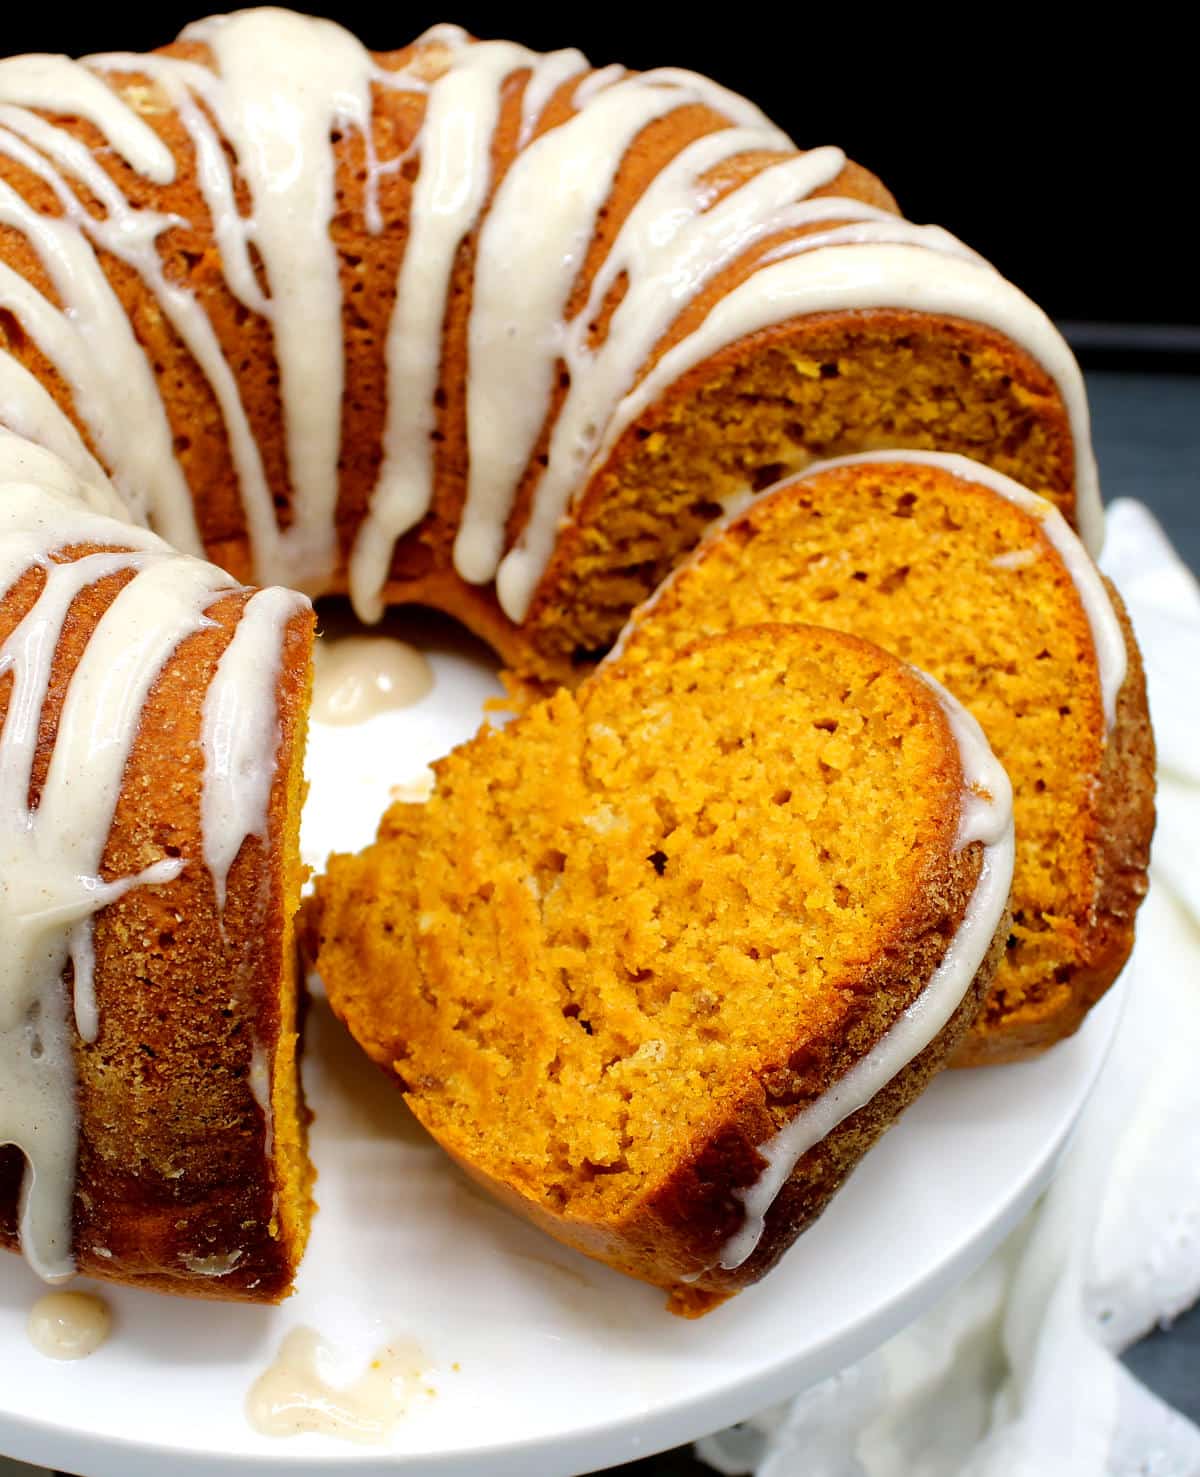 Front photo of slices of cake cut out of a vegan pumpkin bundt cake with glaze.